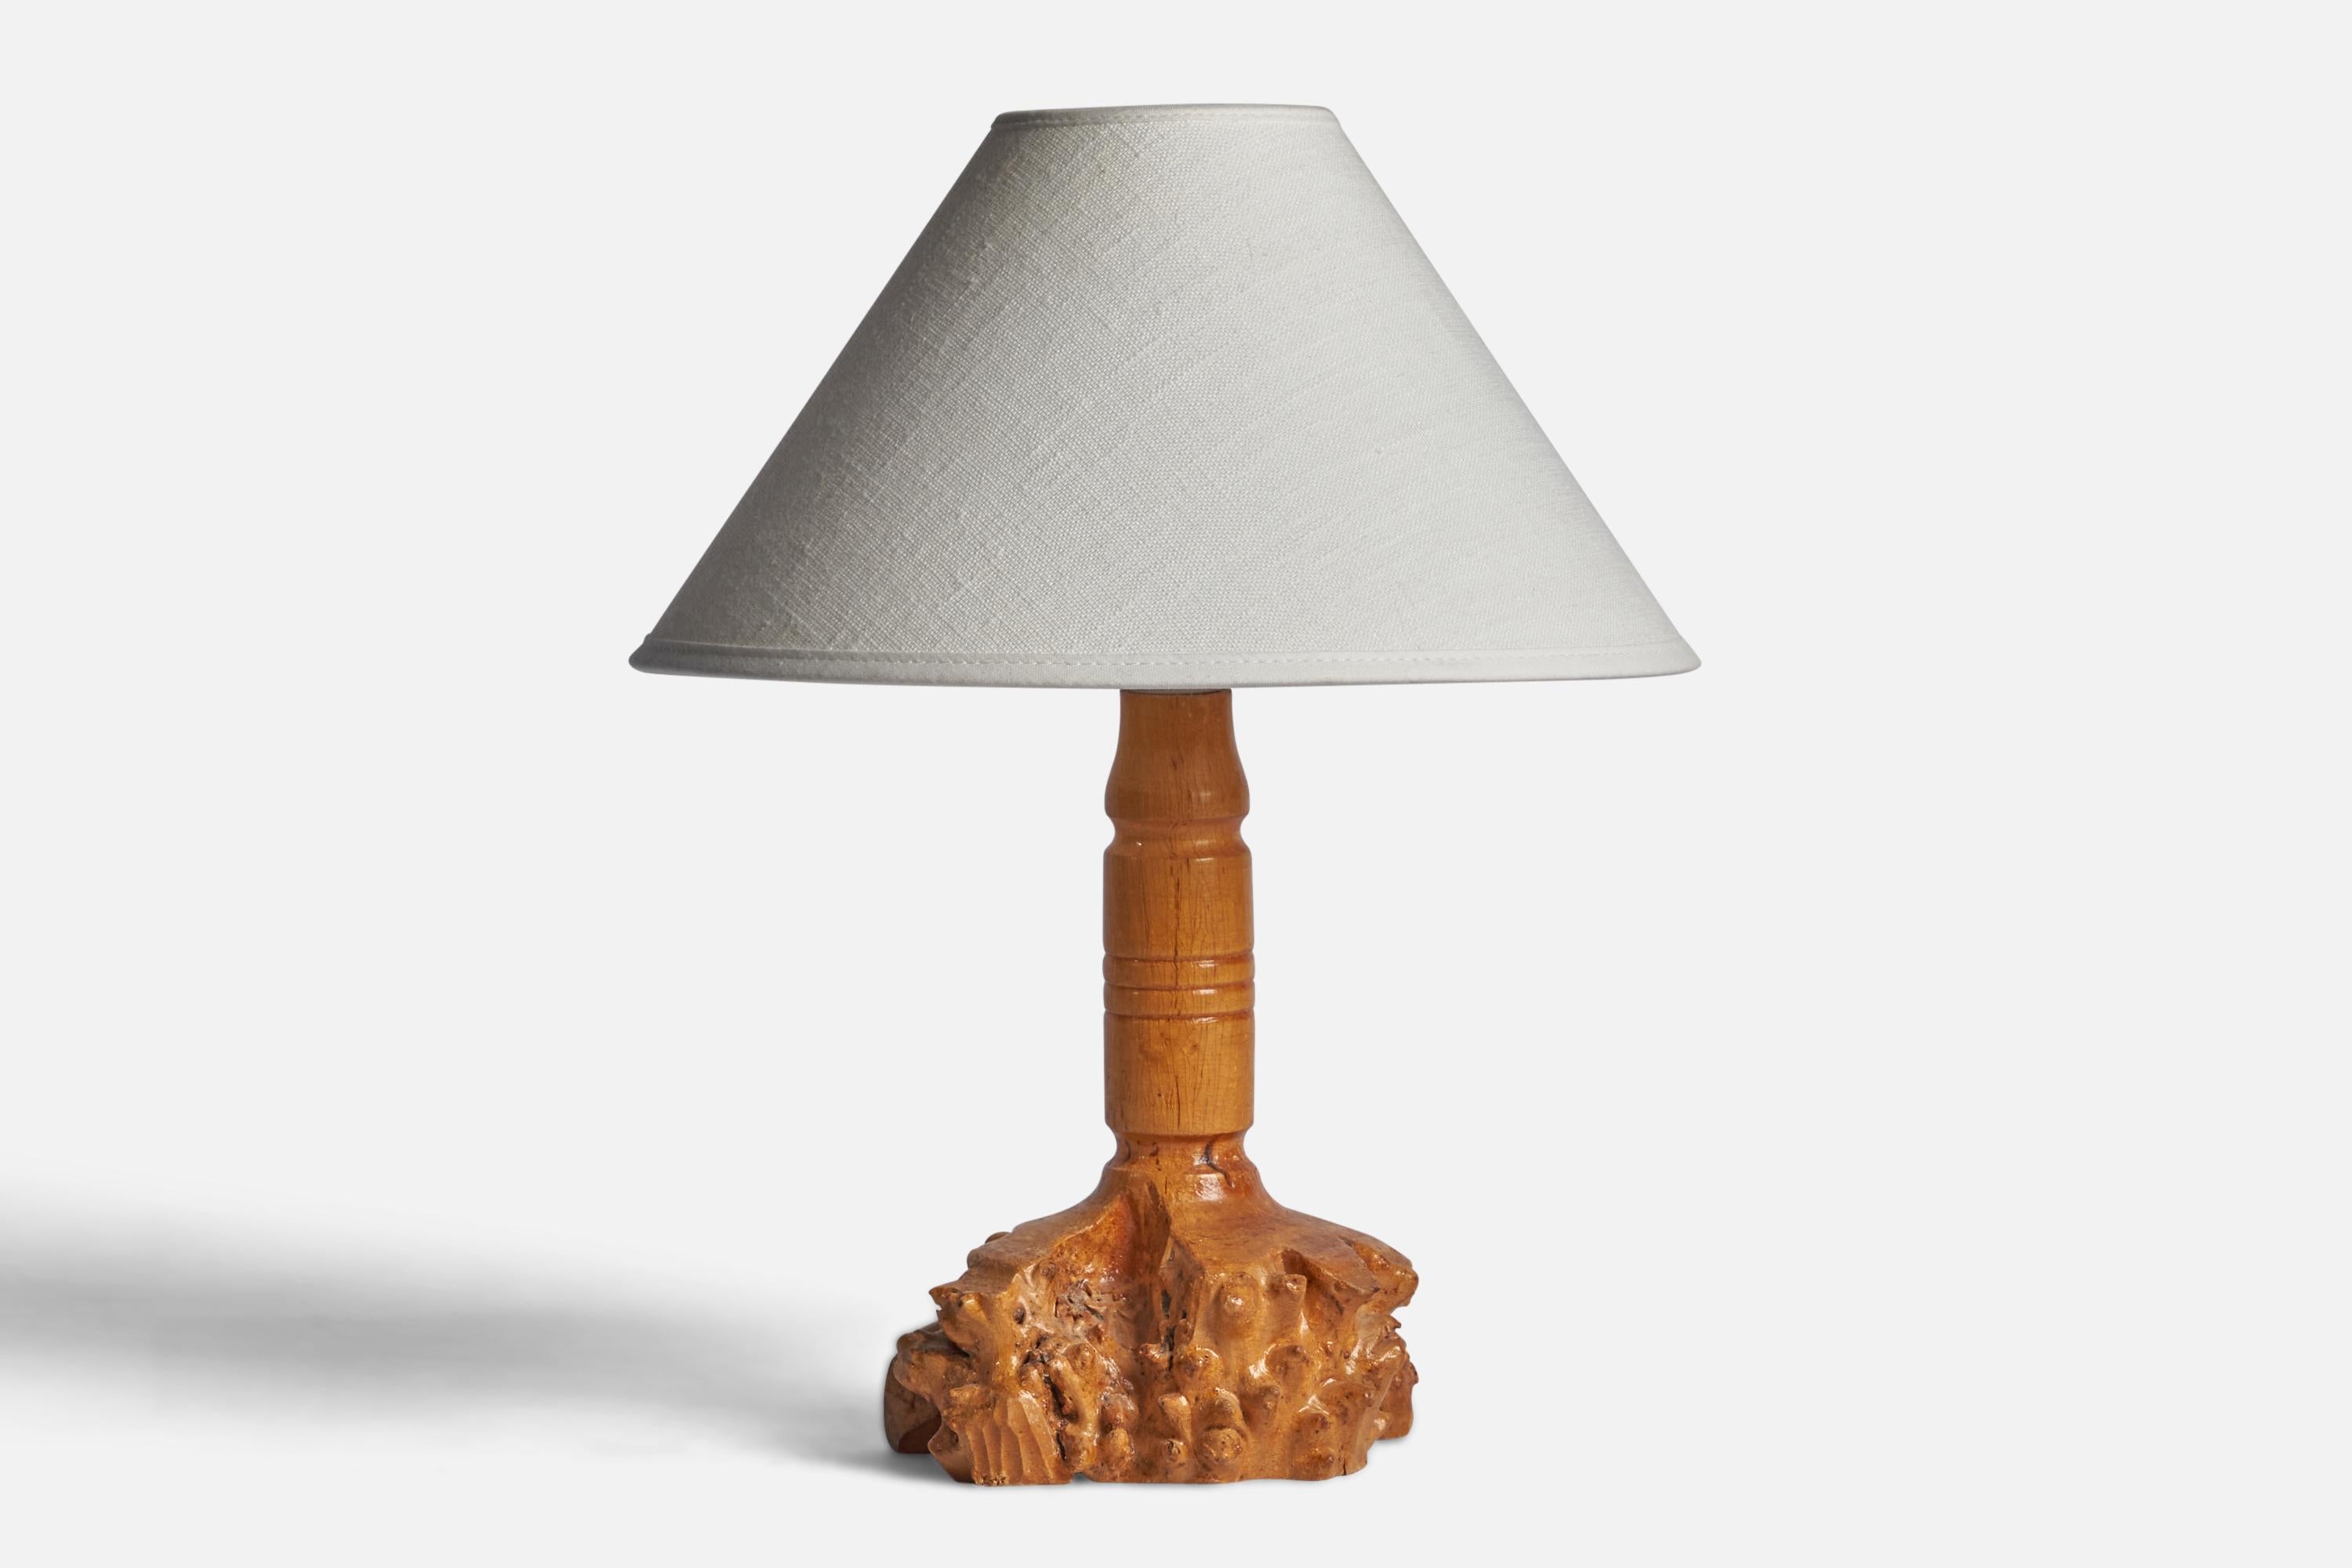 A freeform burl wood table lamp designed and produced in Sweden, c. 1950s.

Dimensions of Lamp (inches): 9.5” H x 5” Diameter
Dimensions of Shade (inches): 2.5” Top Diameter x 10” Bottom Diameter x 5.5